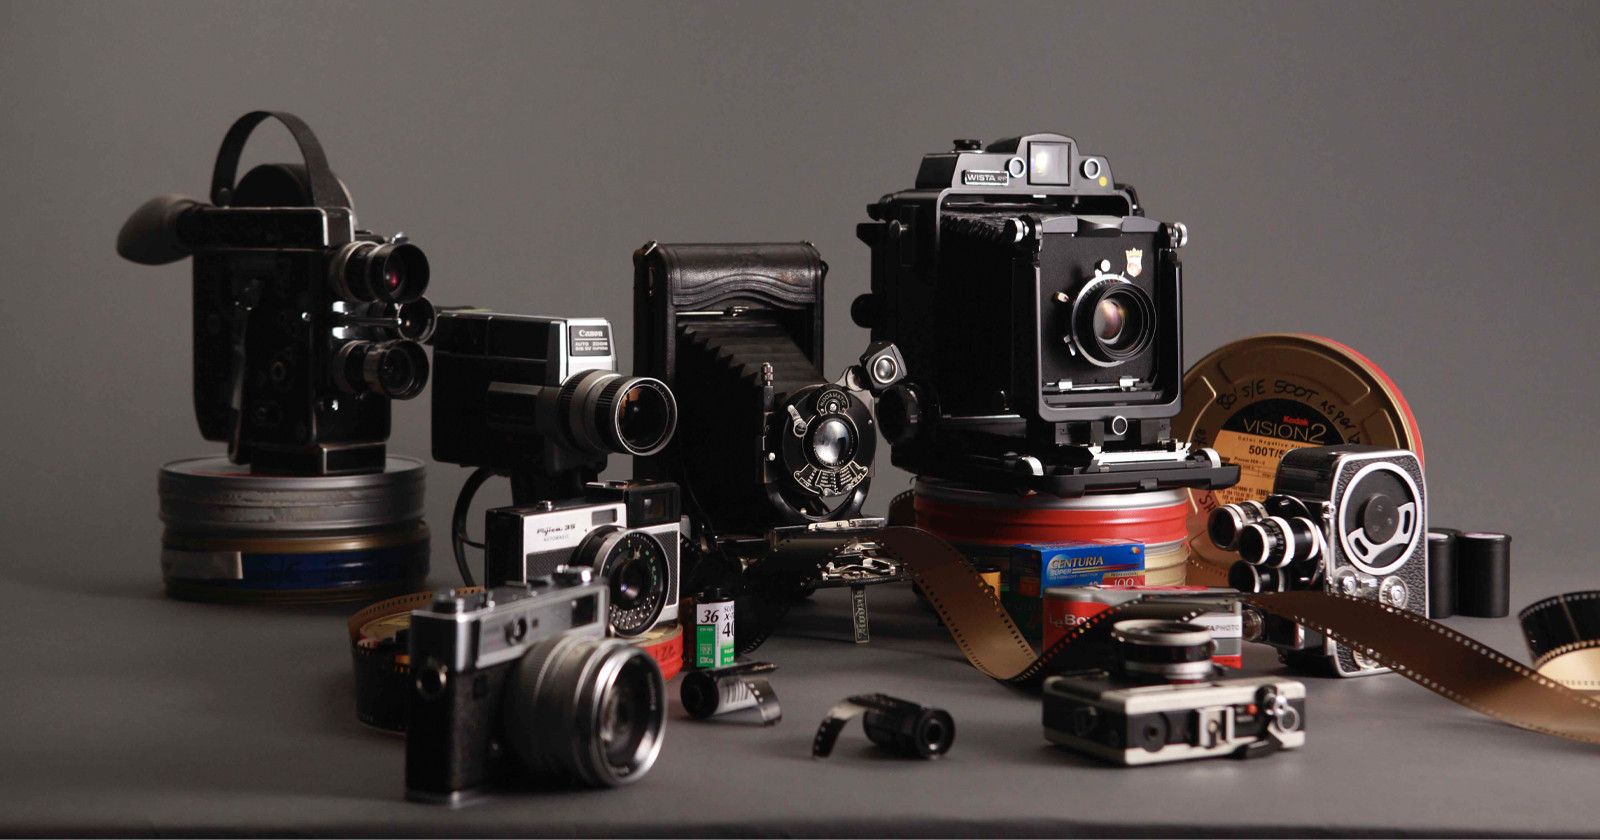 ‘Revival’ is a Documentary About the Resurgence of Film Photography